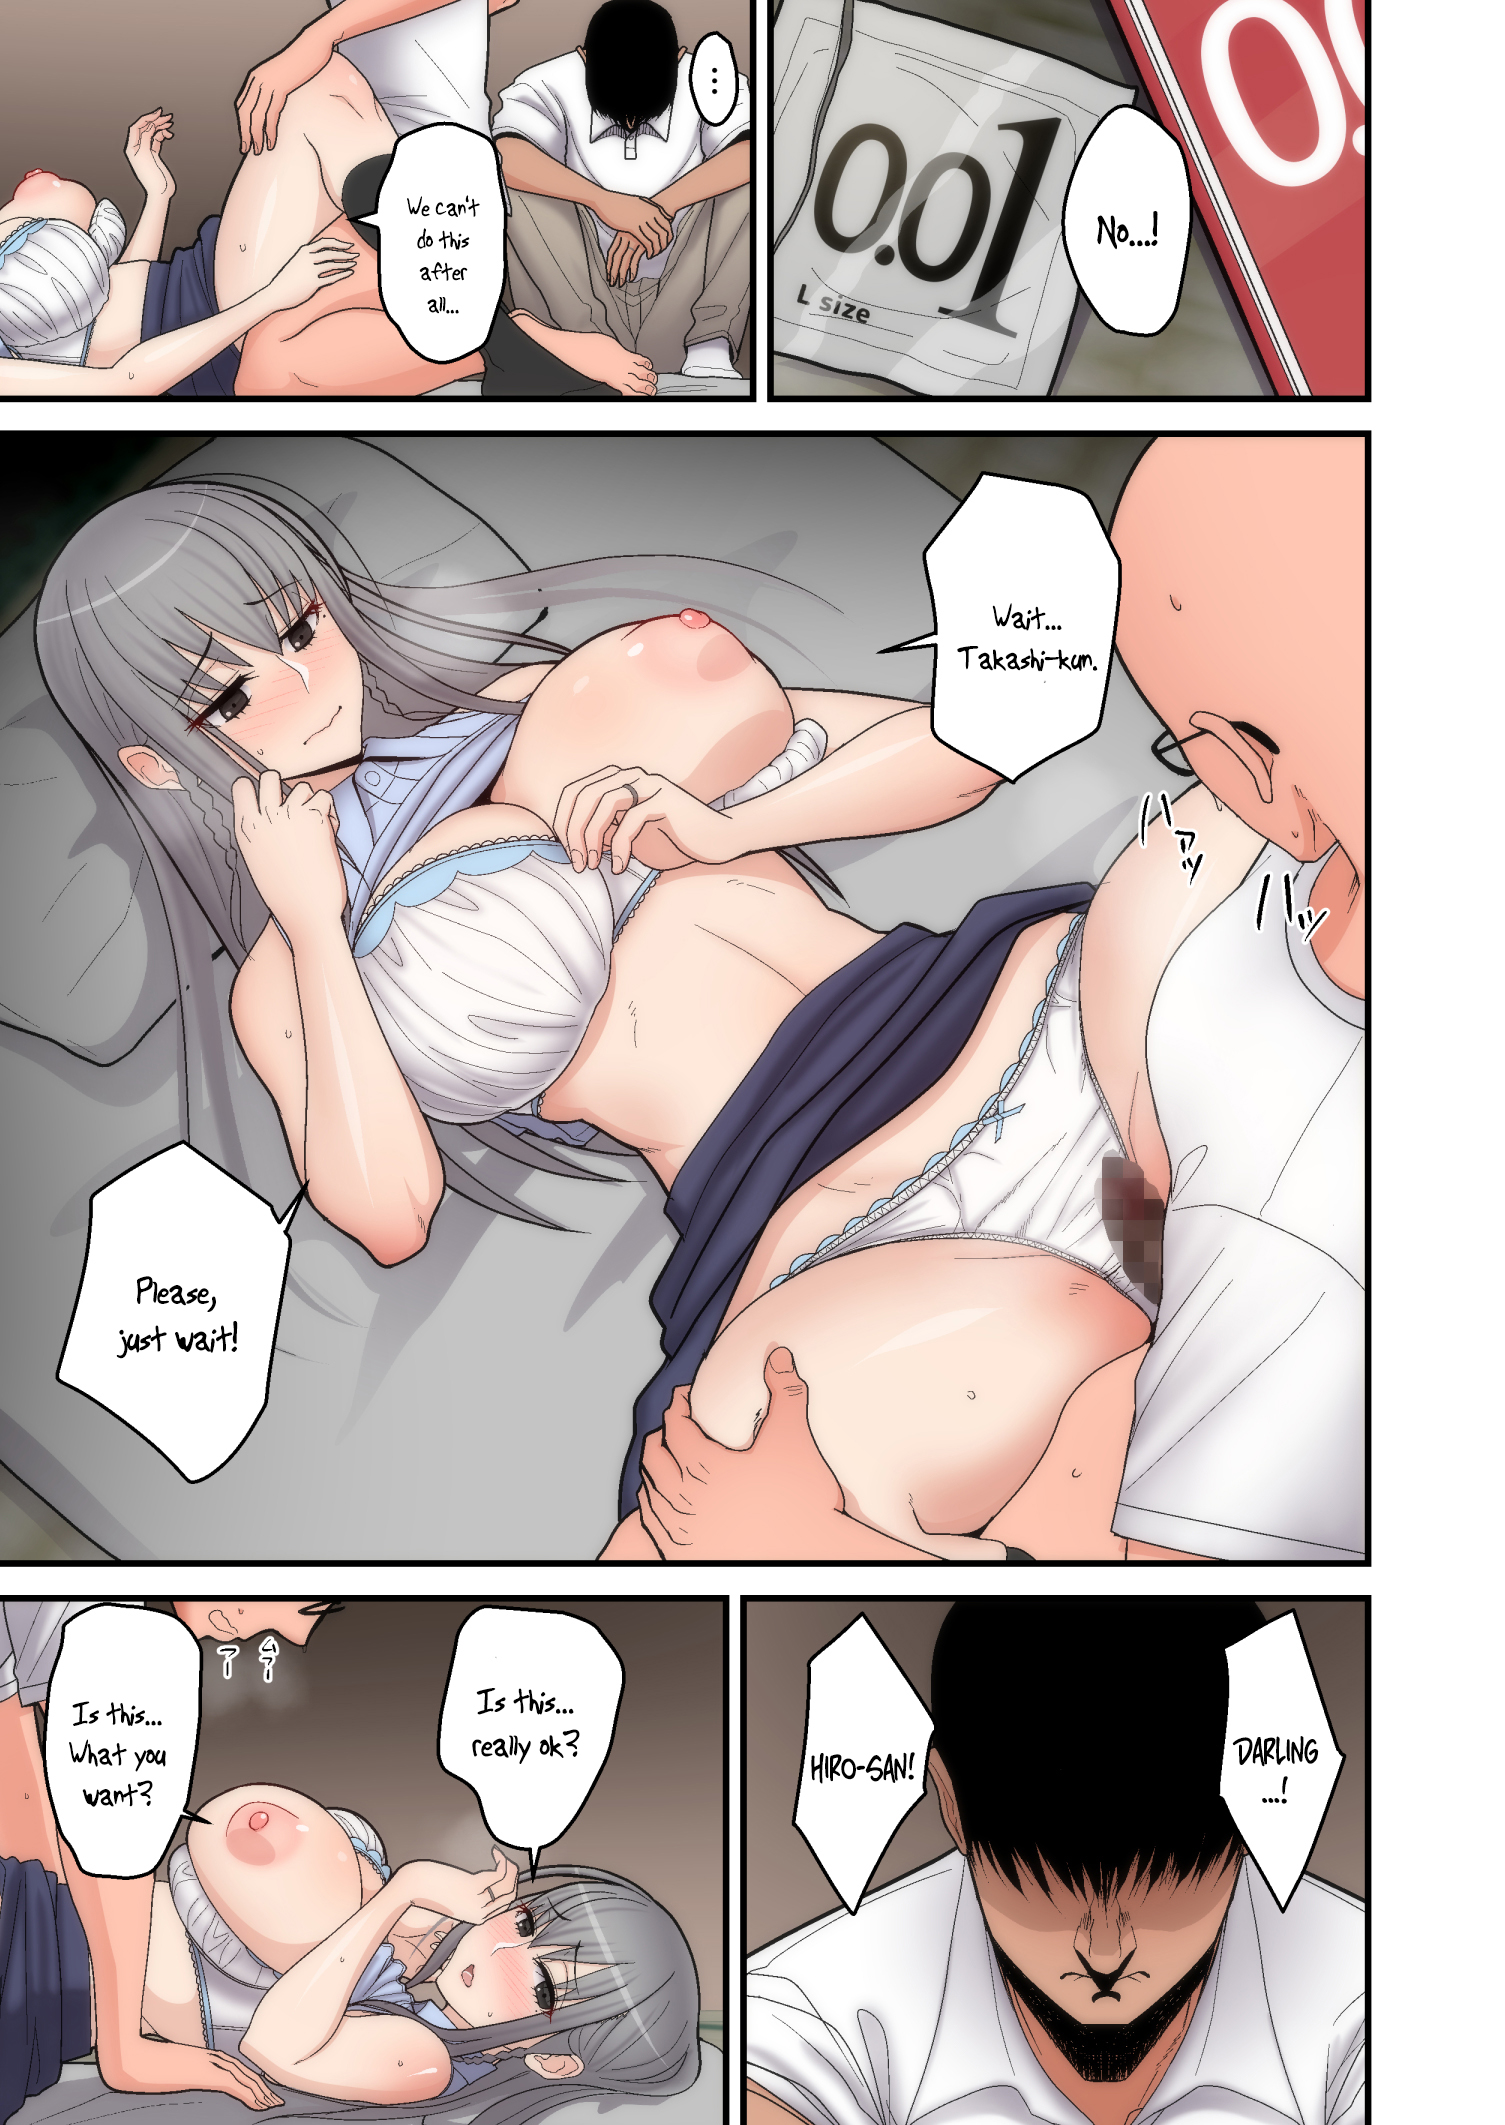 Husband must watch cheating wife fuck or shell die - hentai comics pic picture